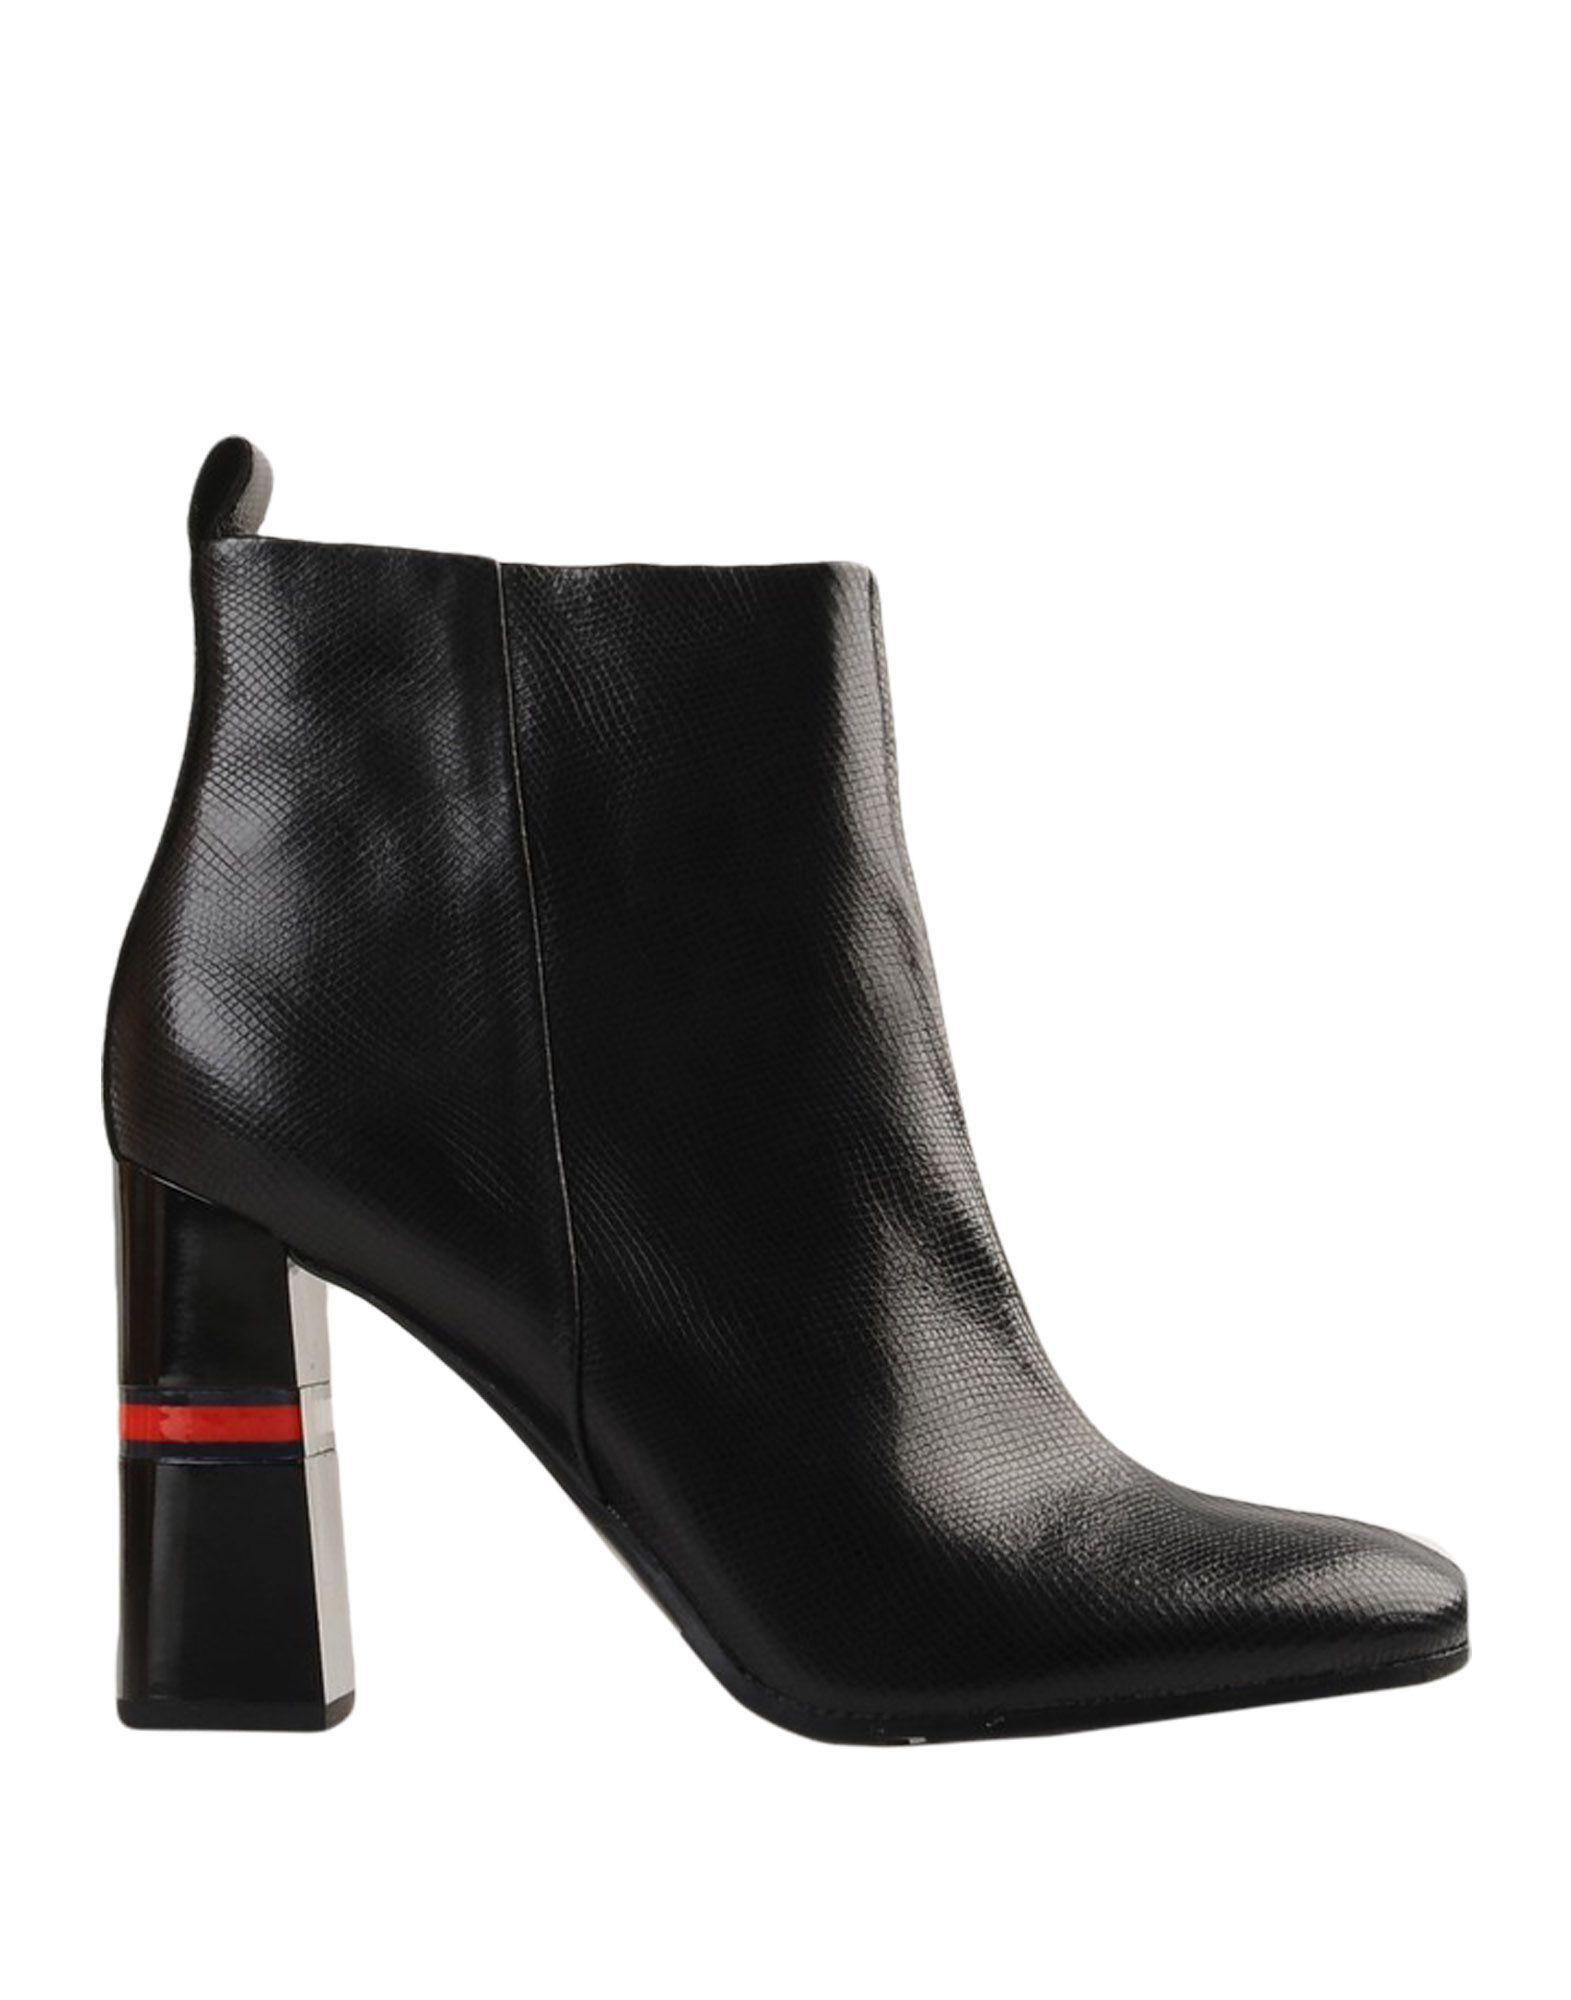 Tommy Hilfiger Leather Ankle Boots in Black - Lyst